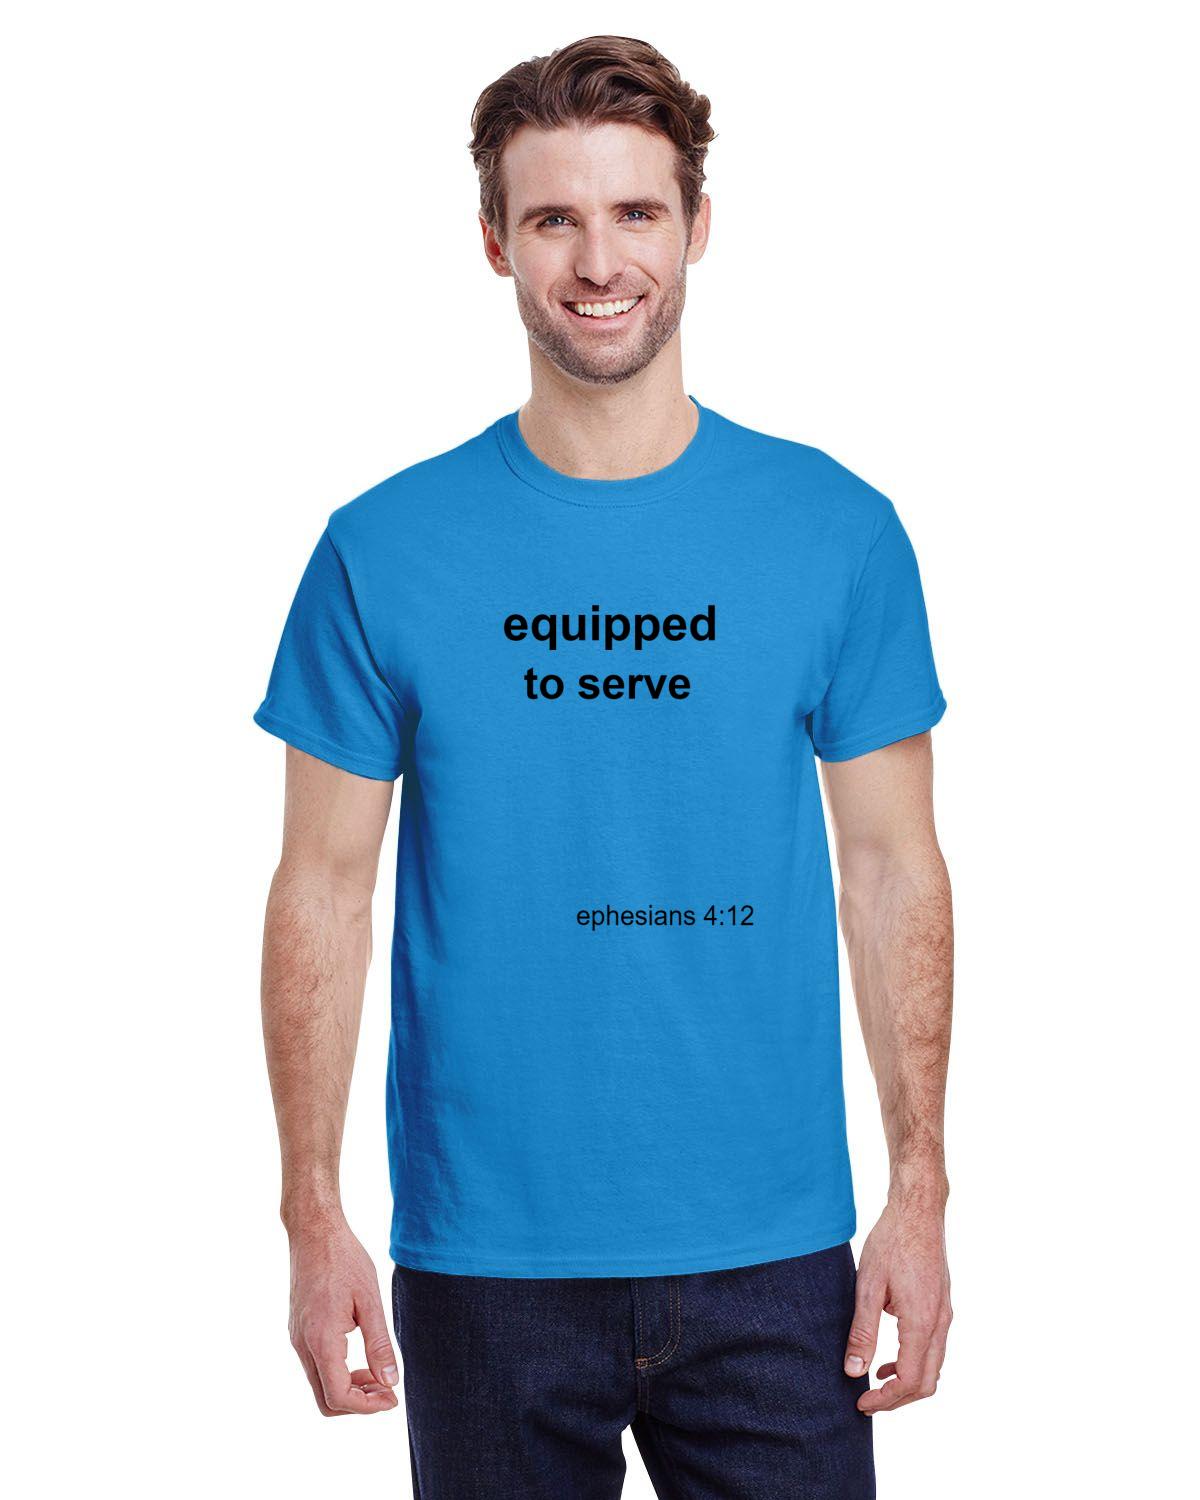 Equipped to serve T-shirt- Eph 4:12